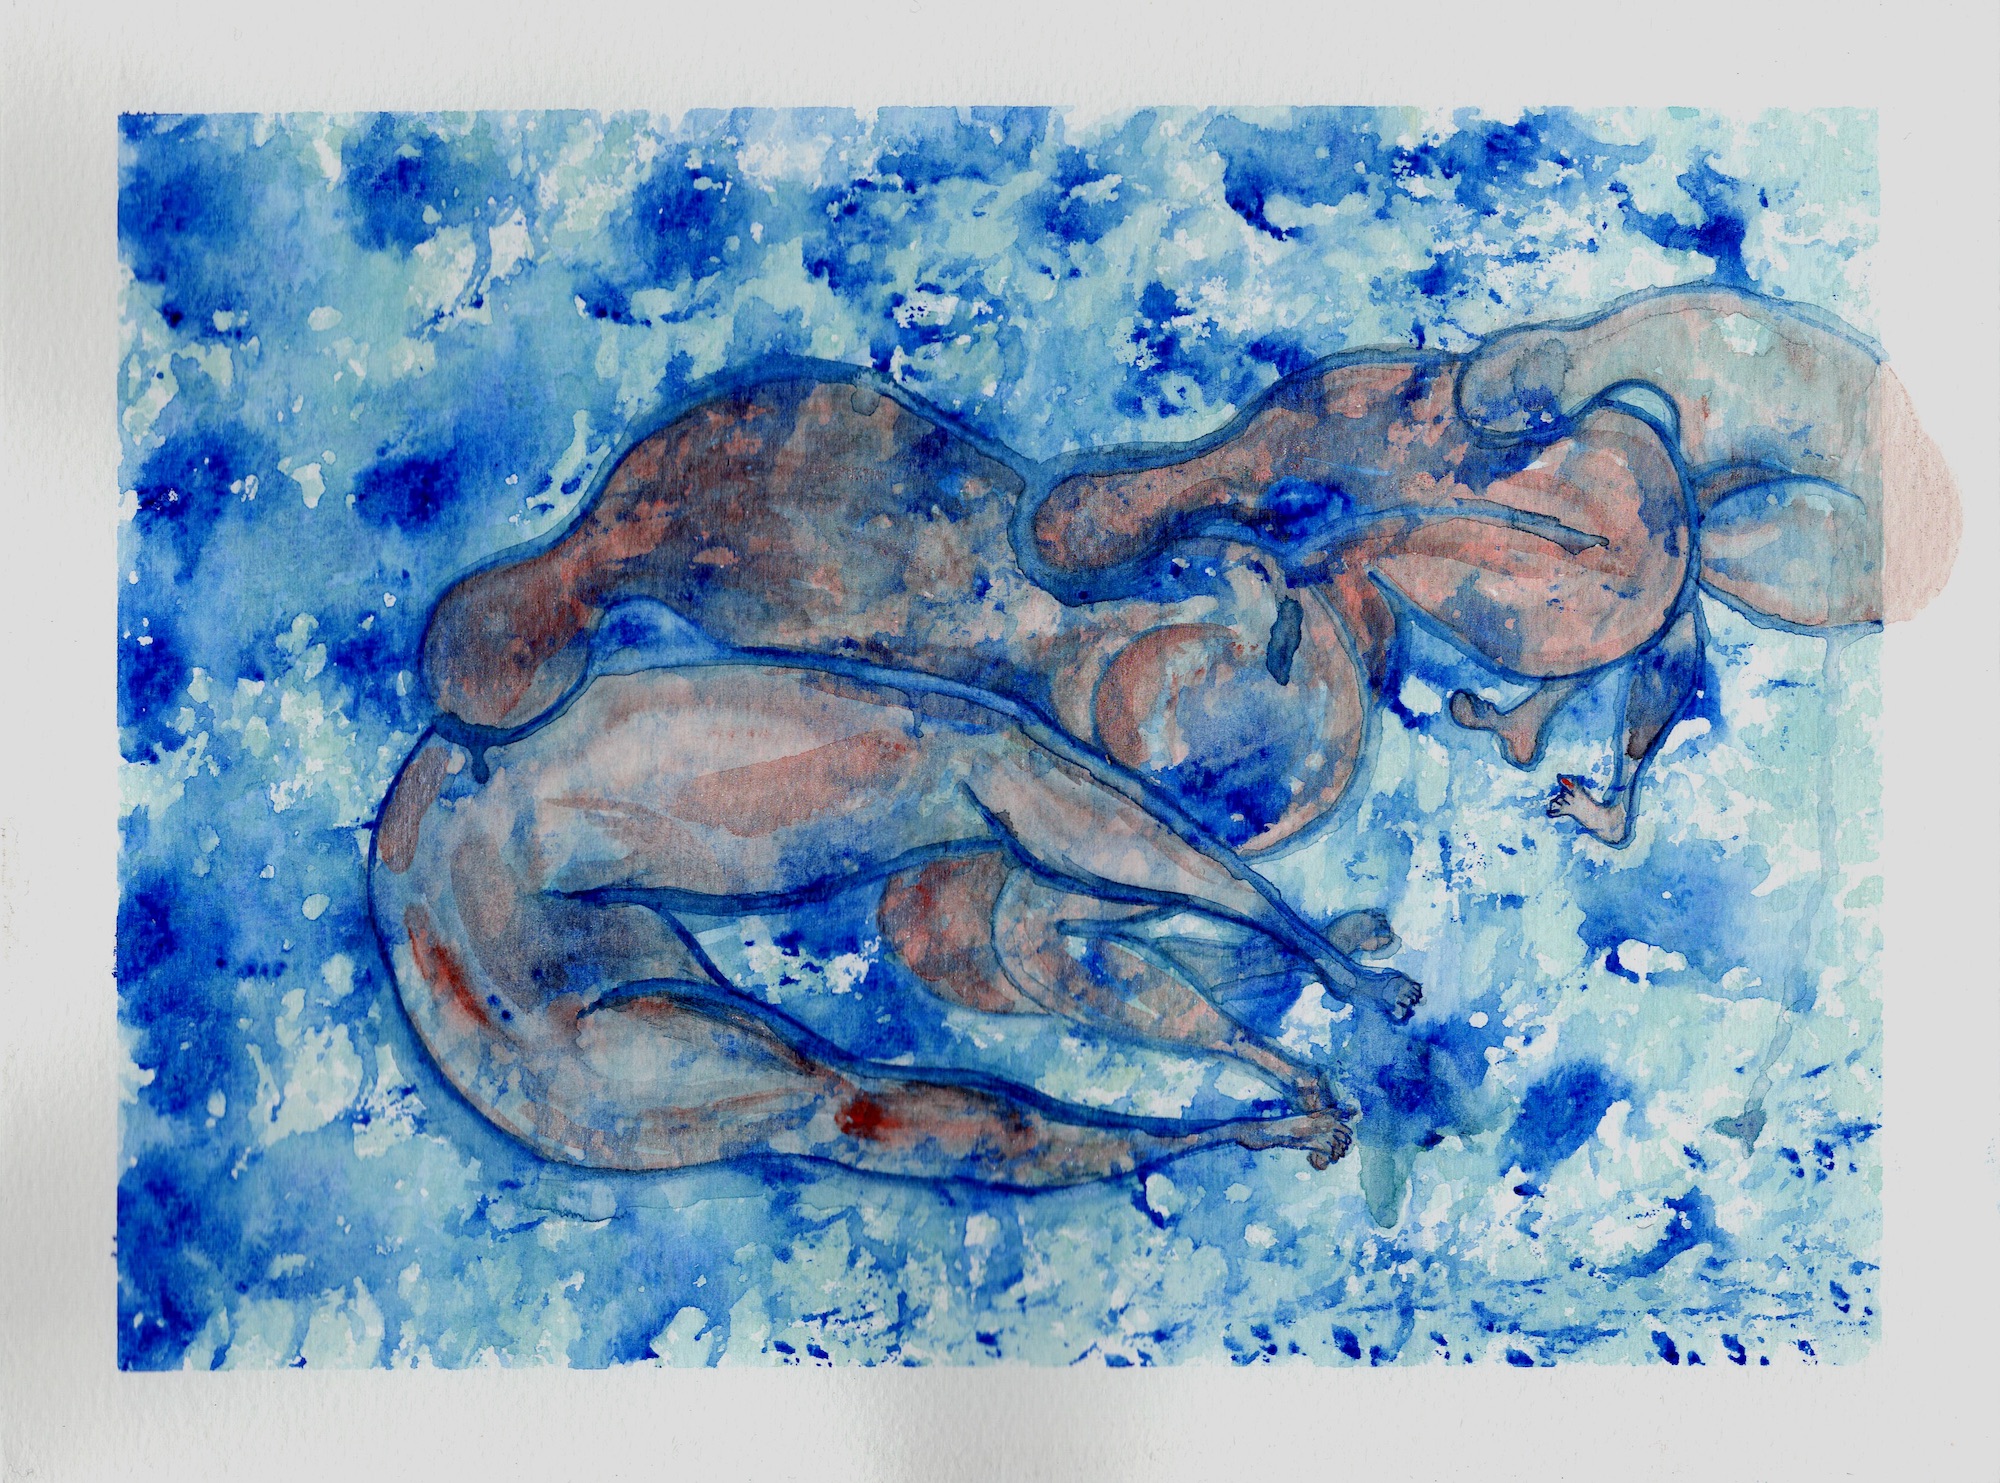 watercolor of abstracted bodies layered with a blue background